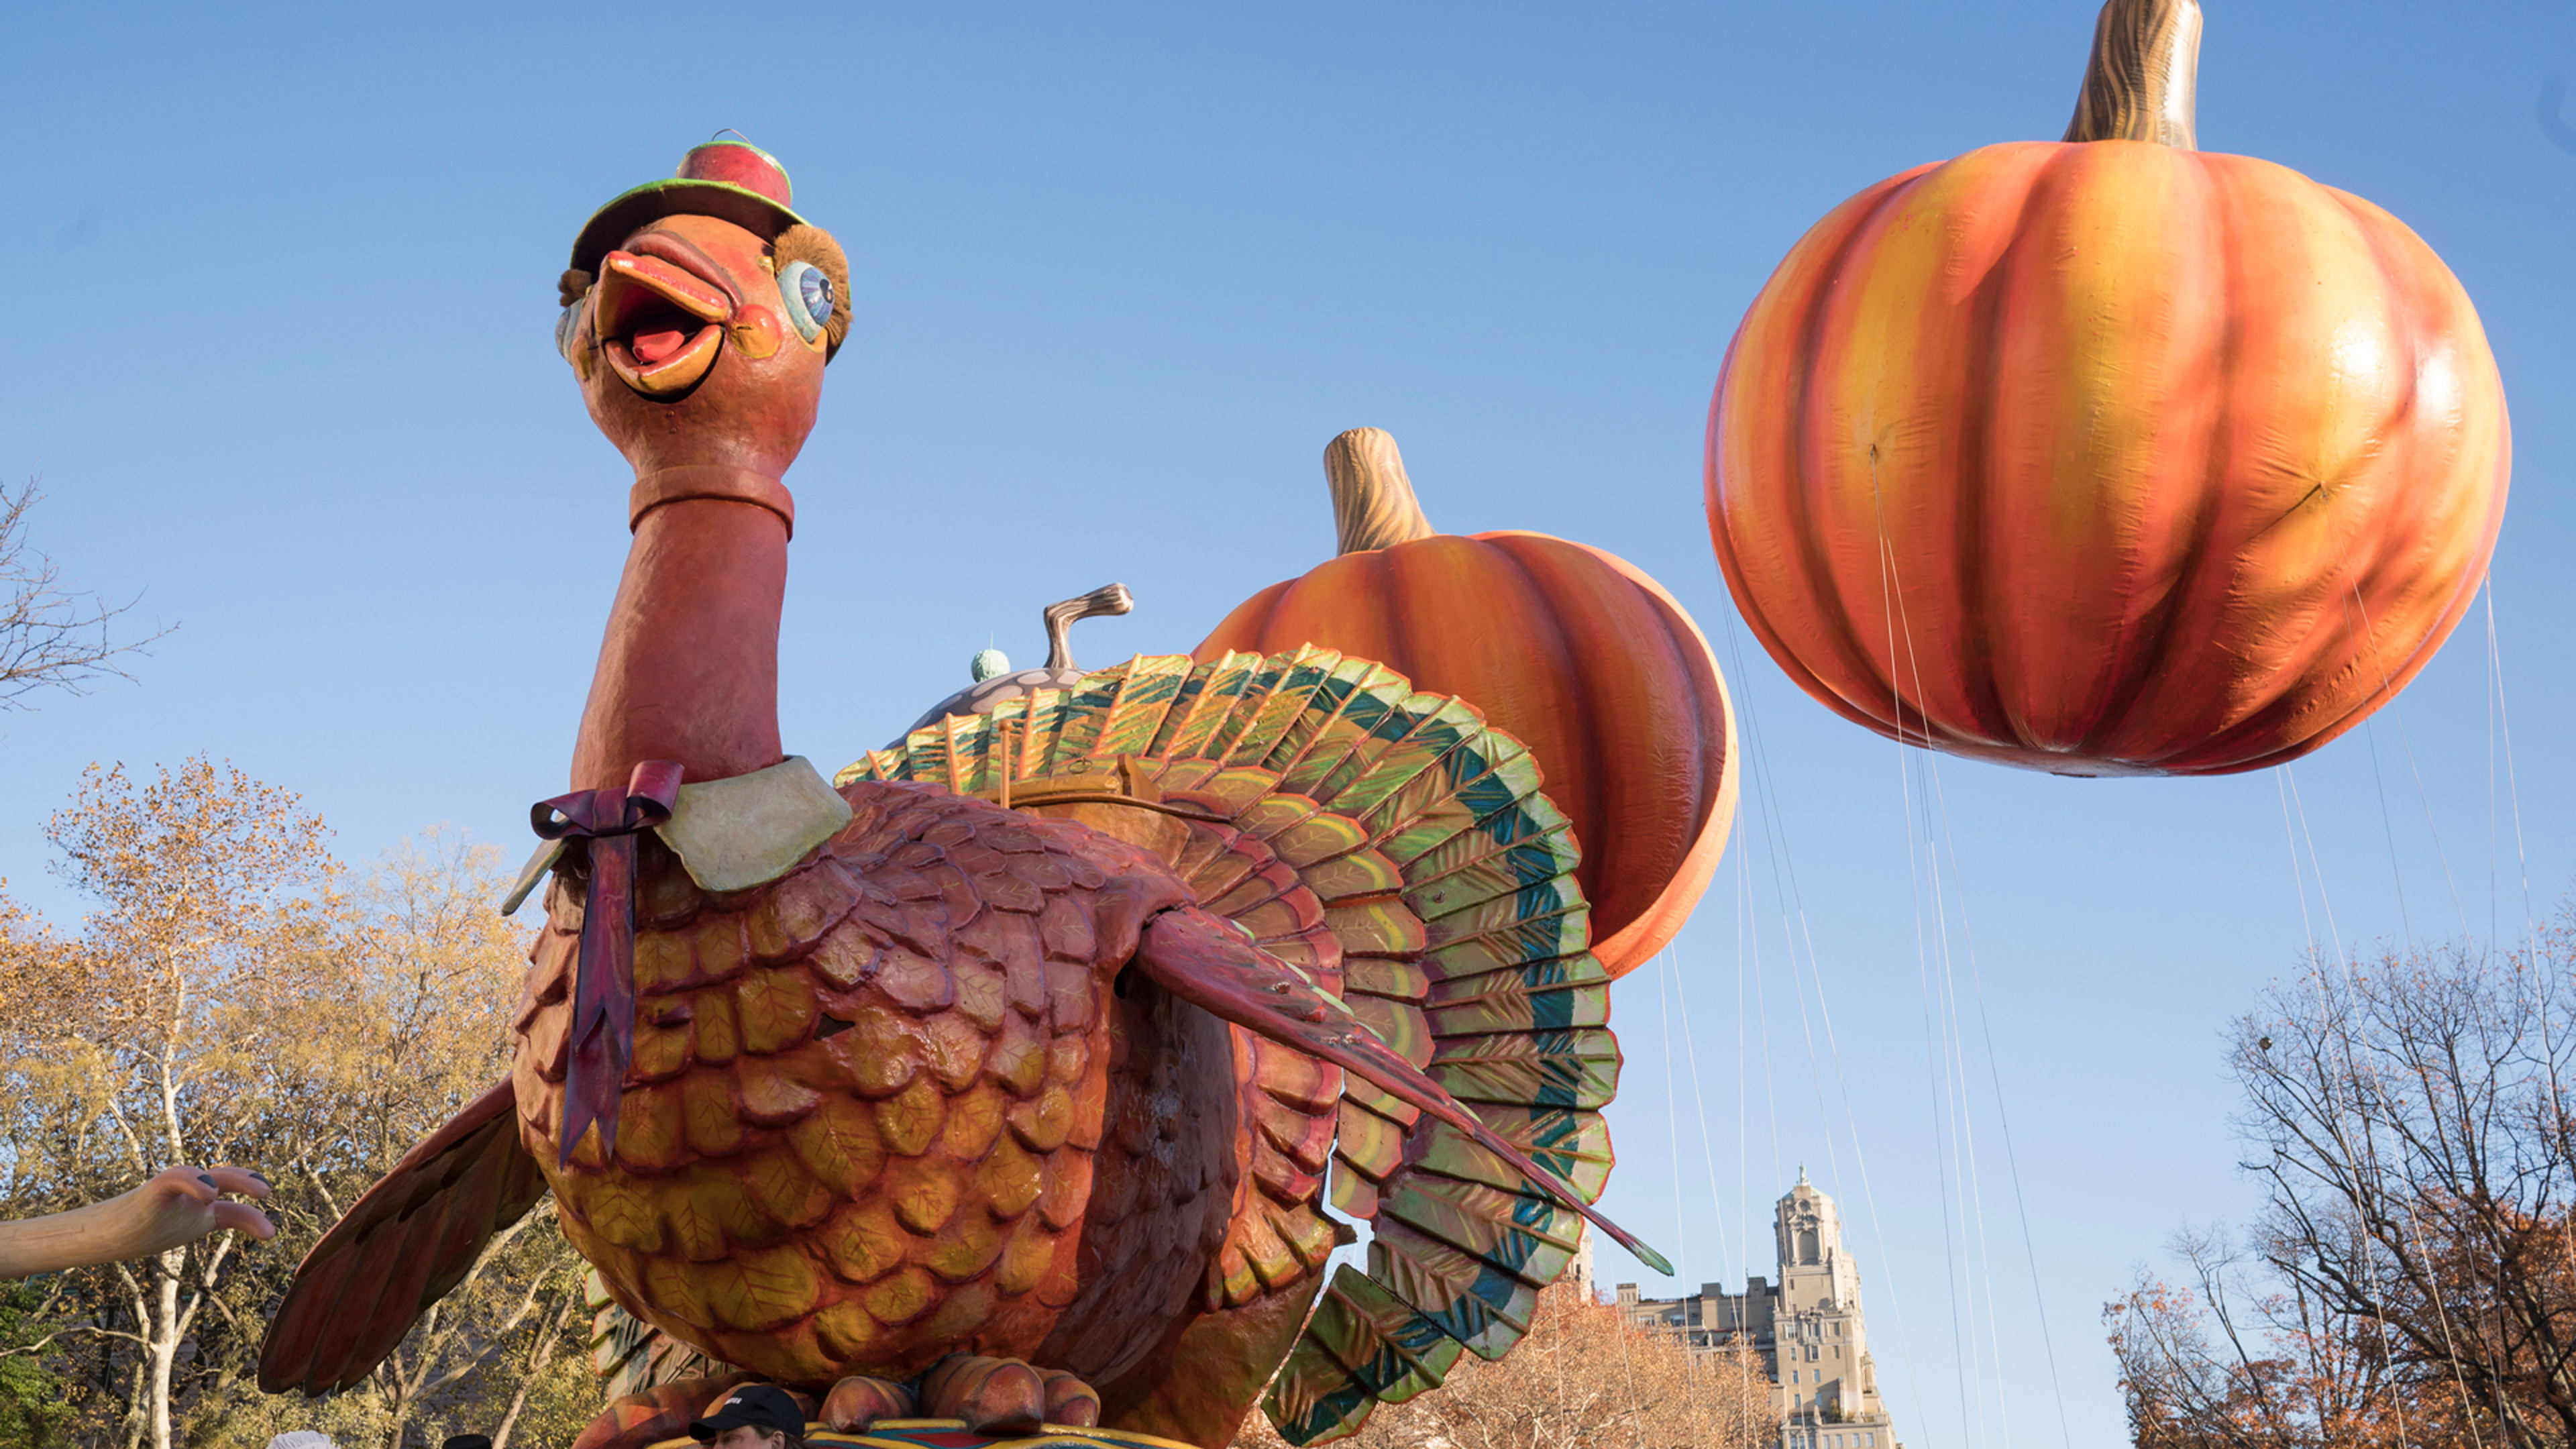 Macy’s Thanksgiving Day Parade live stream: How to watch online without cable